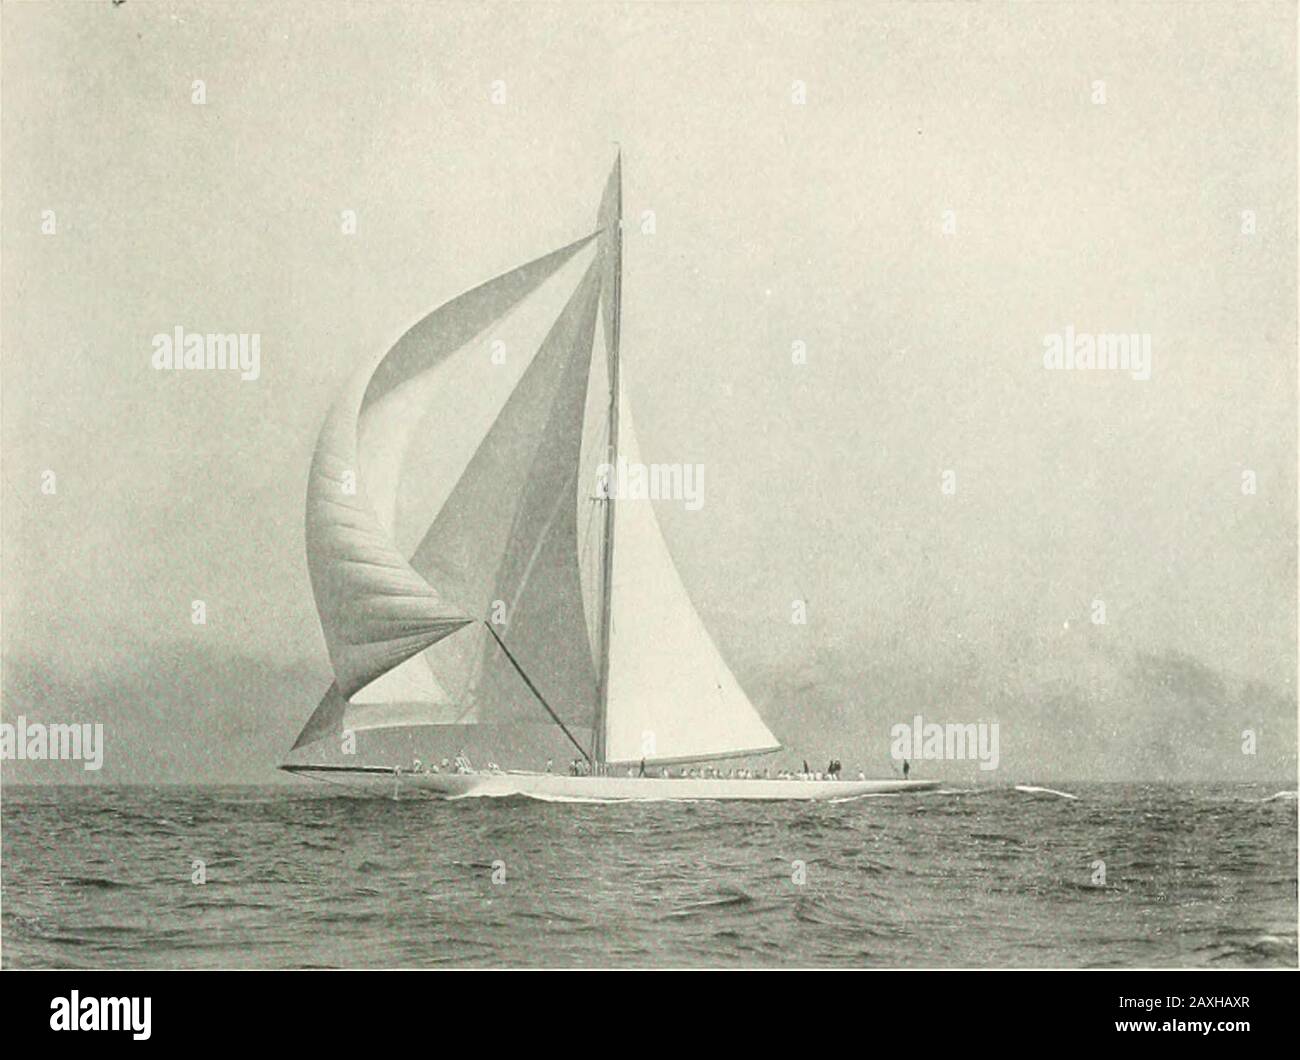 Sailing Through Time James Lumbers Open Edition Collectors Print 11``x15``